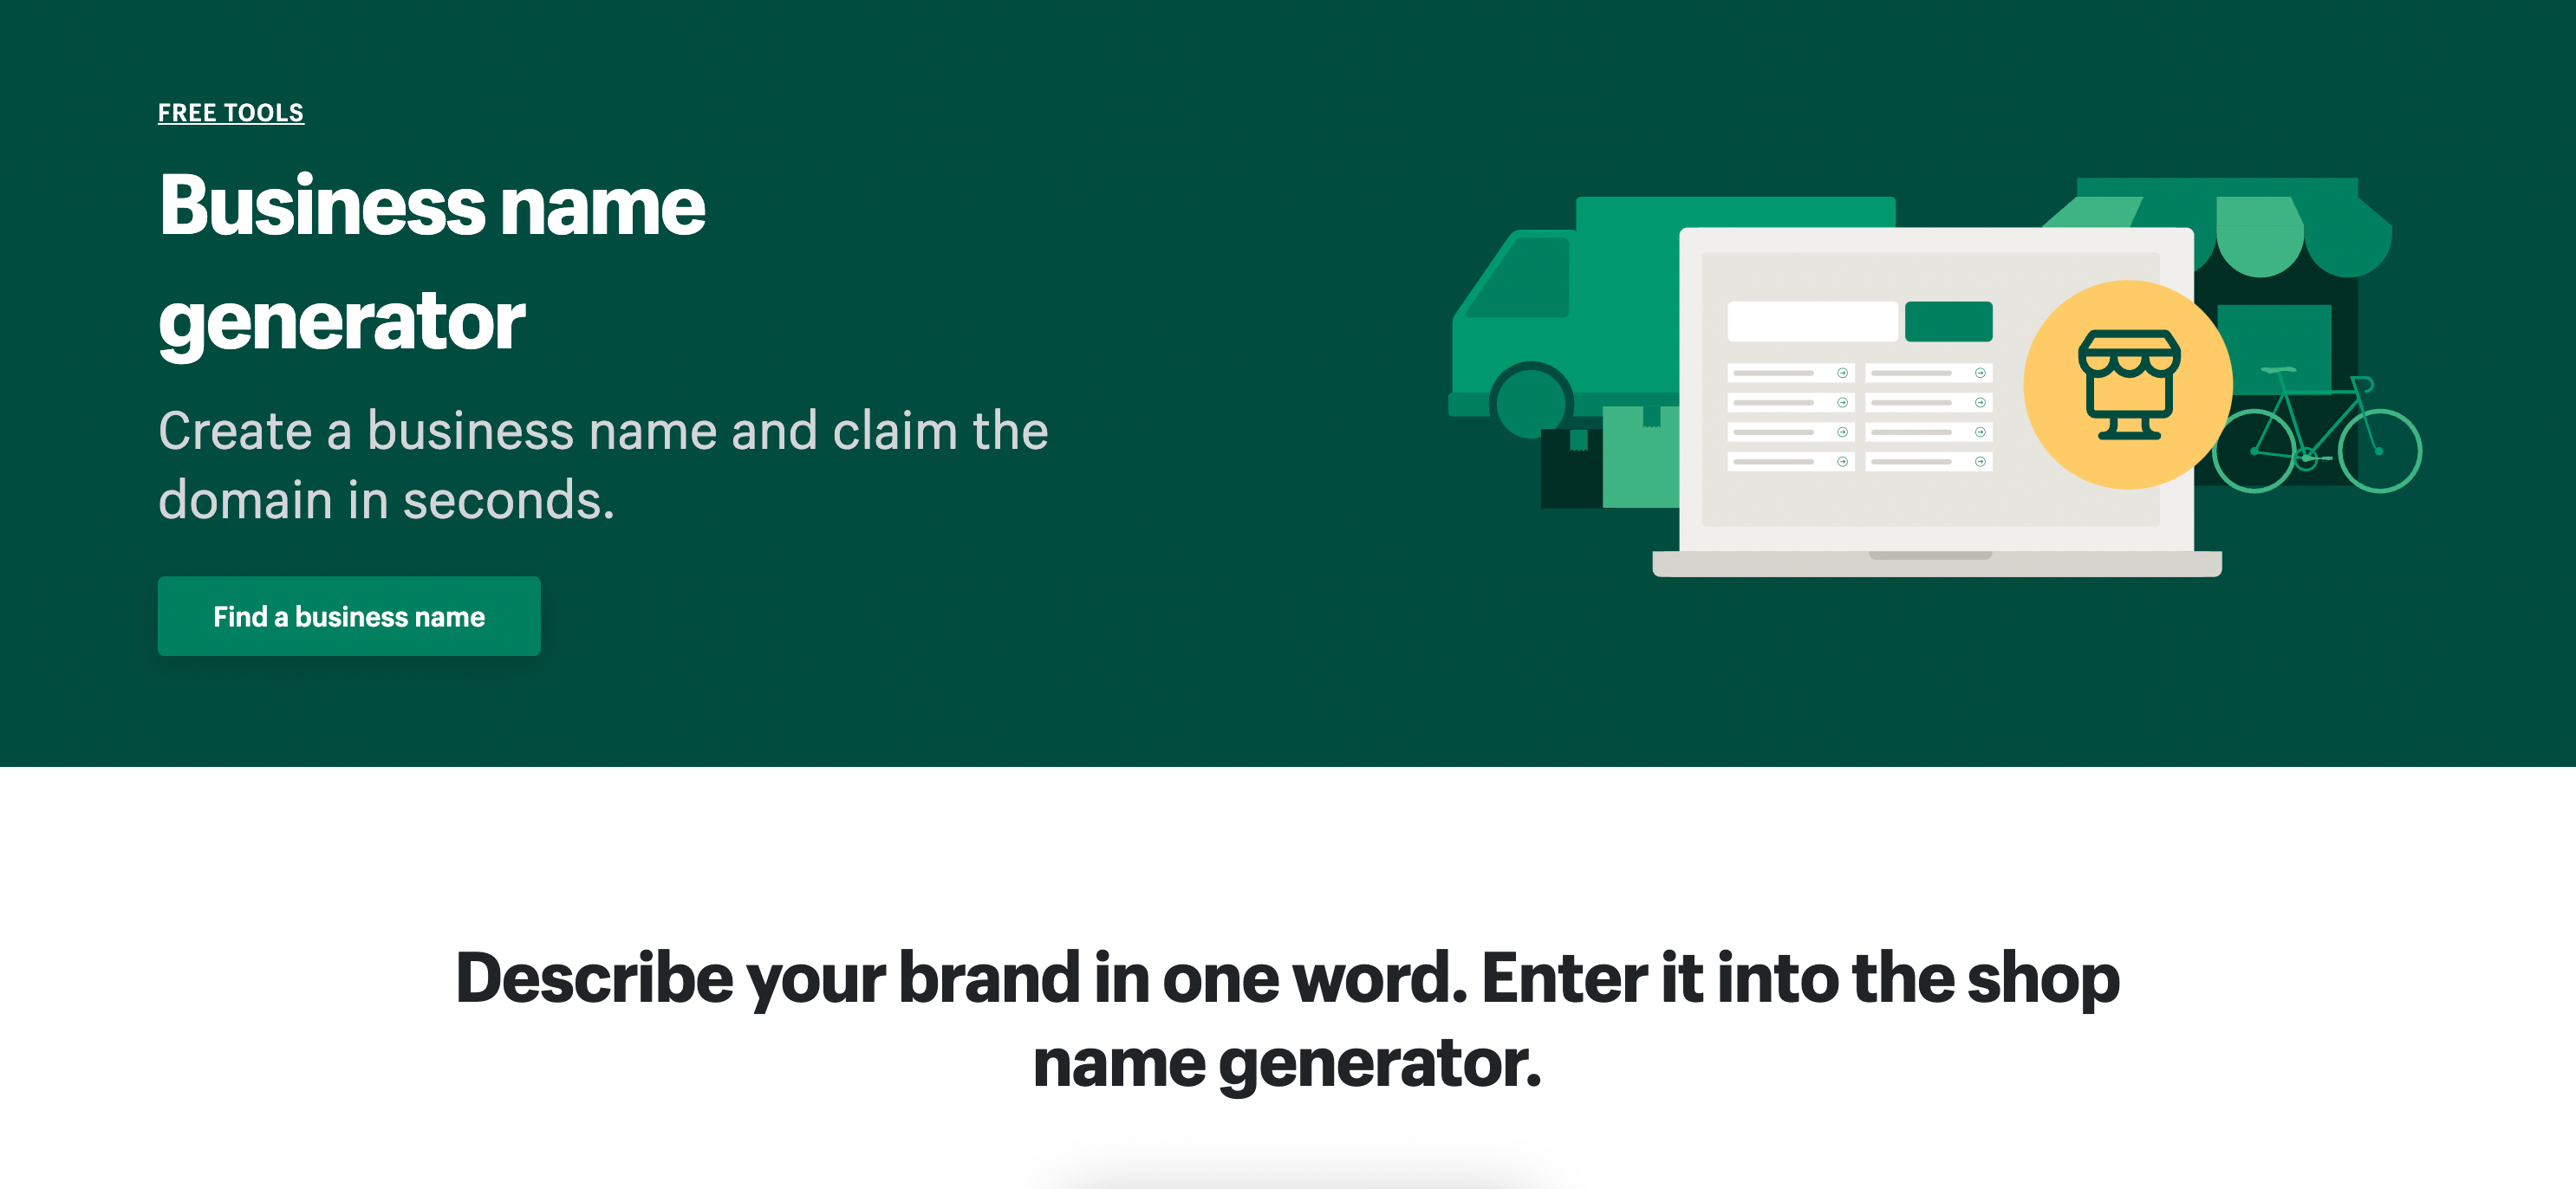 Shopify's business name generator tool is the first step to registering a business